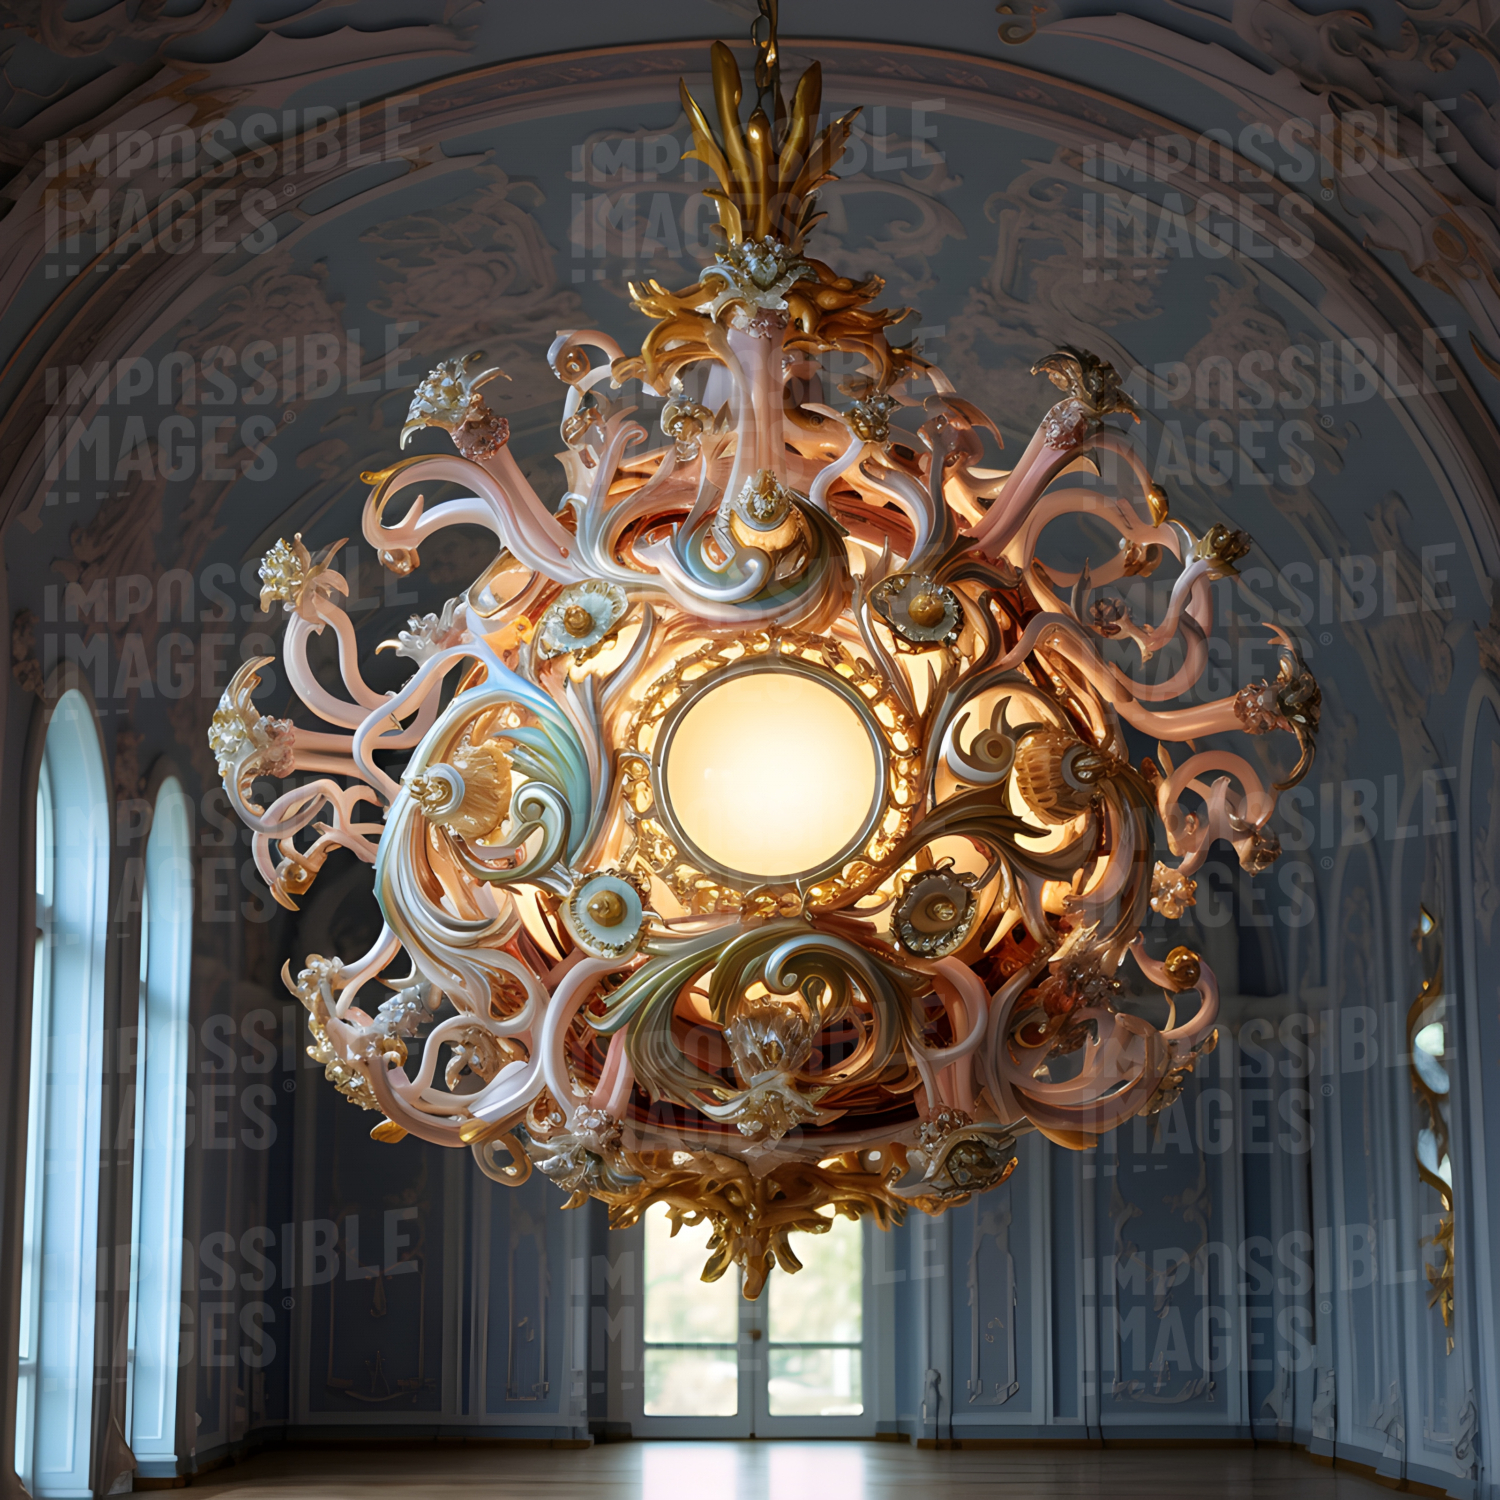 Huge bizarrely ornate organic looking chandelier hanging in the halway of a stately home - 